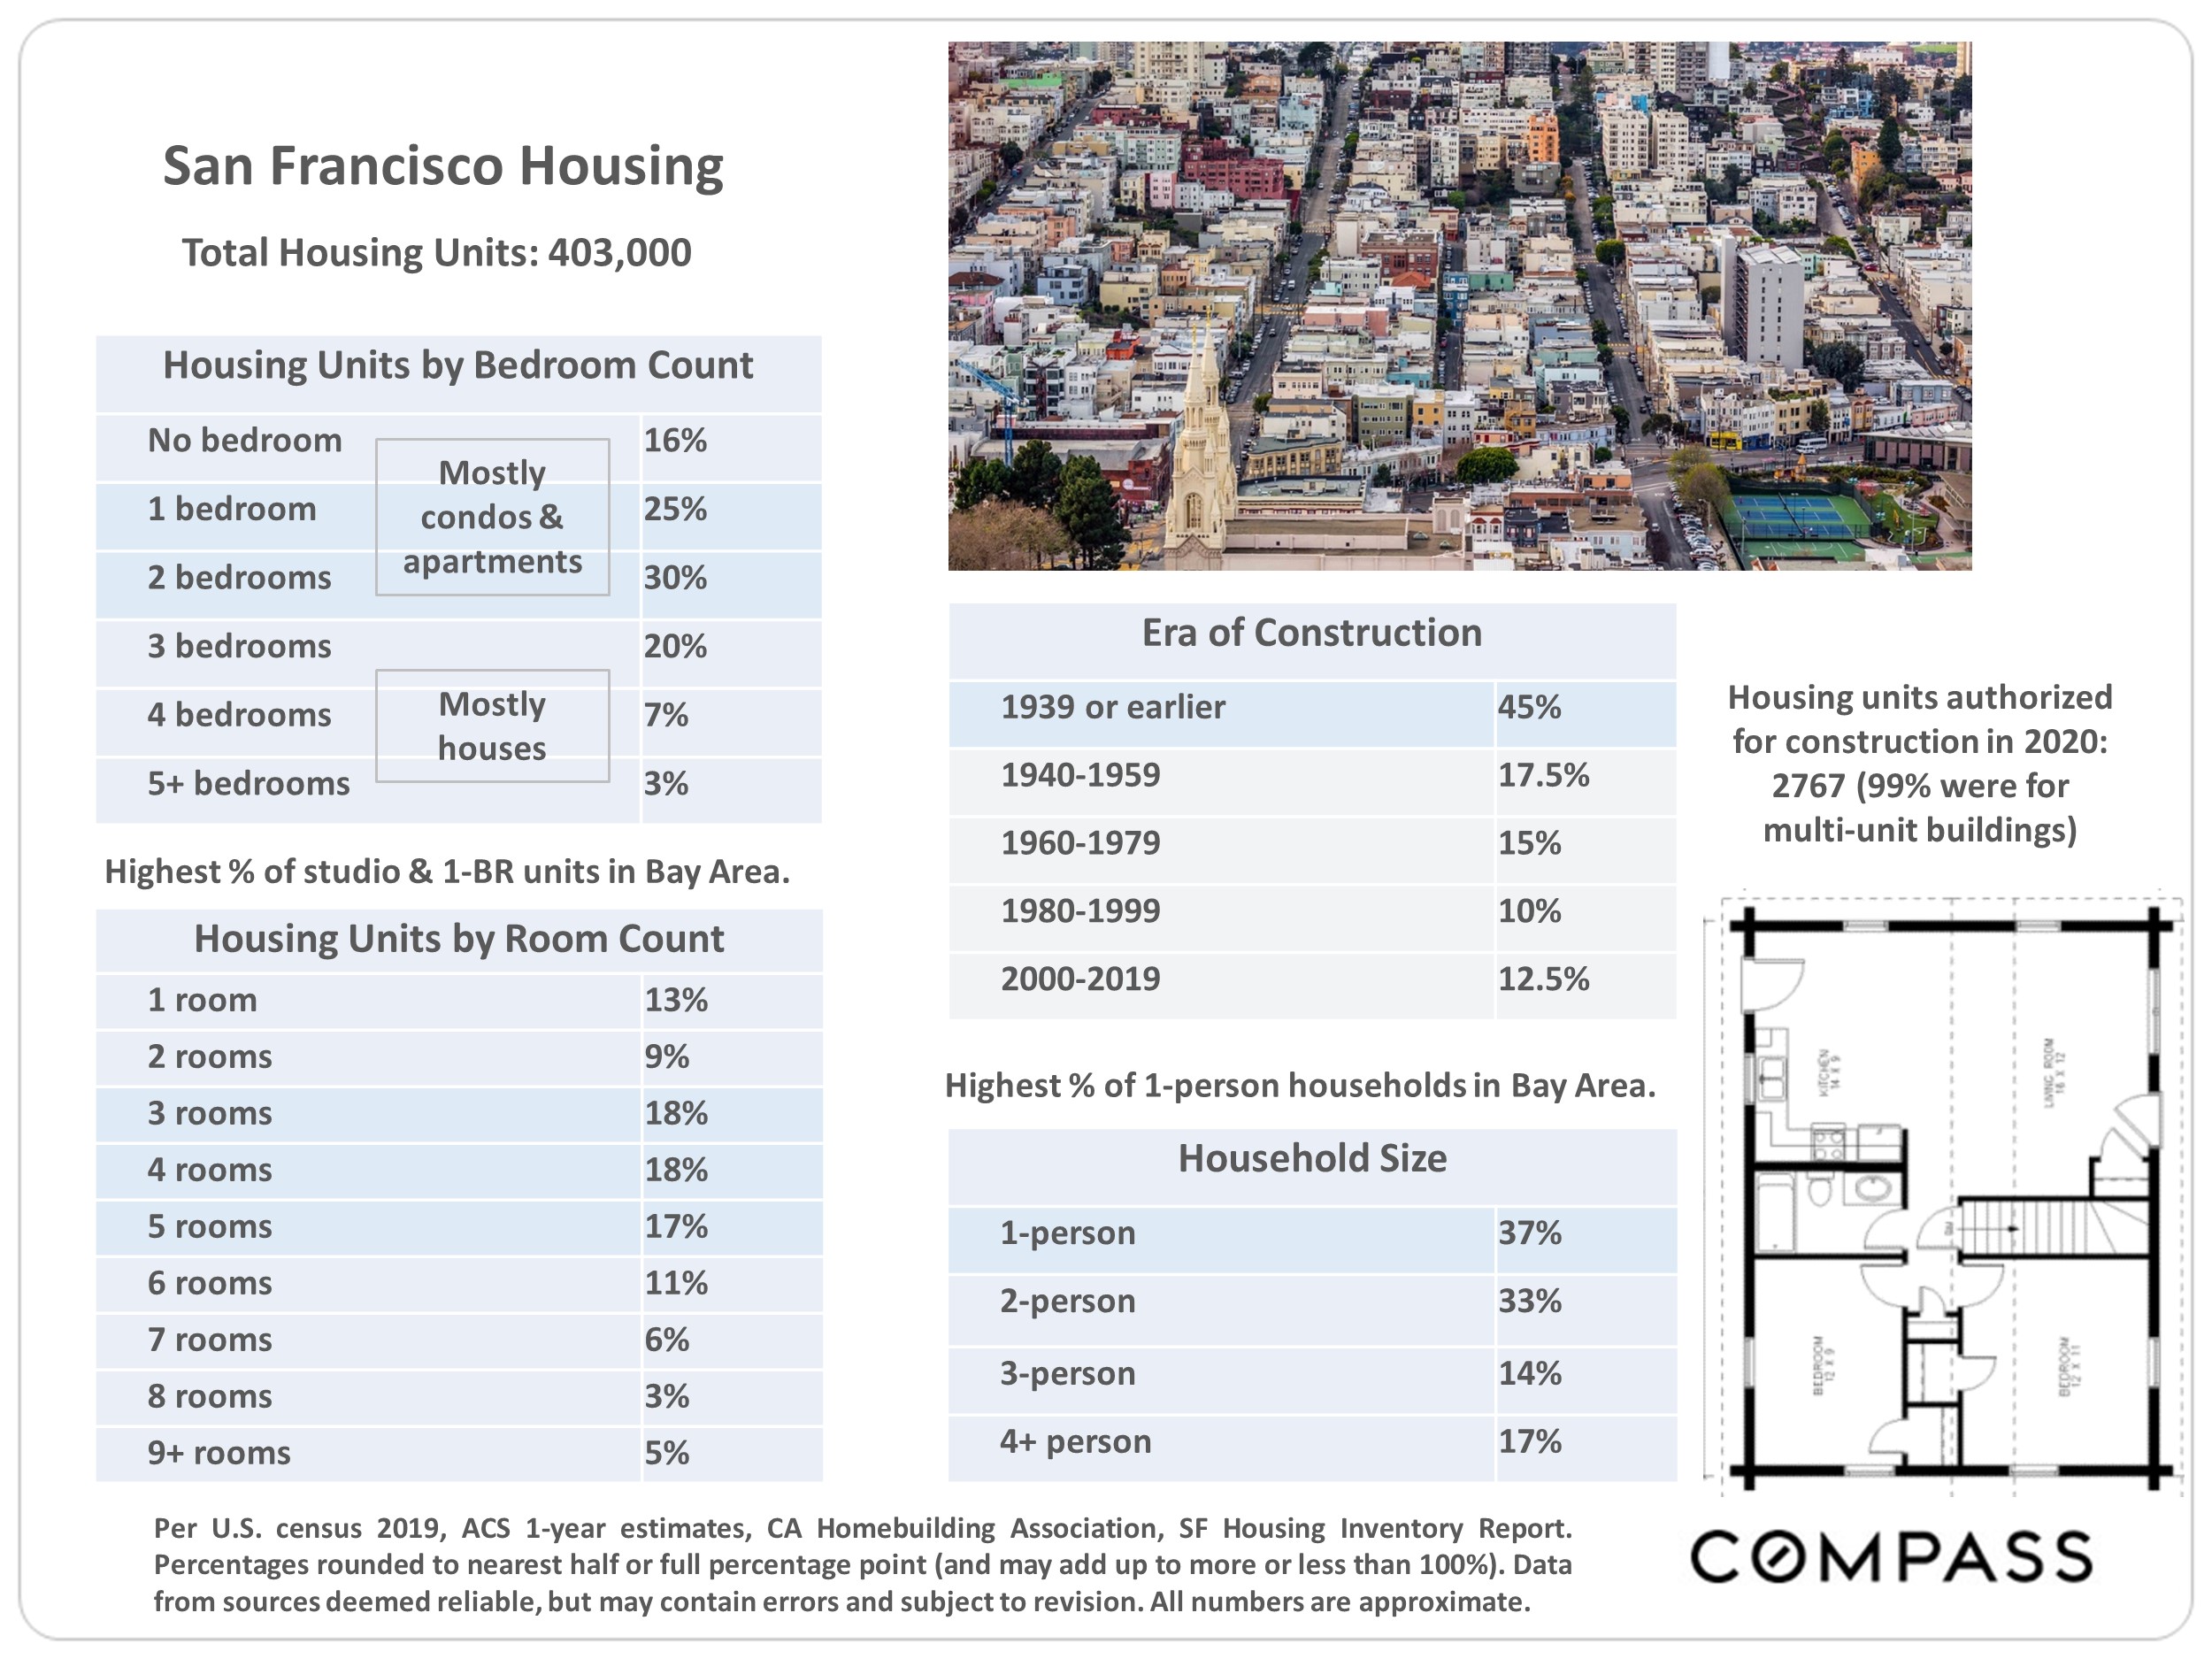 Data showing San Francisco Housing units by bedroom count, room count, era of construction, household size